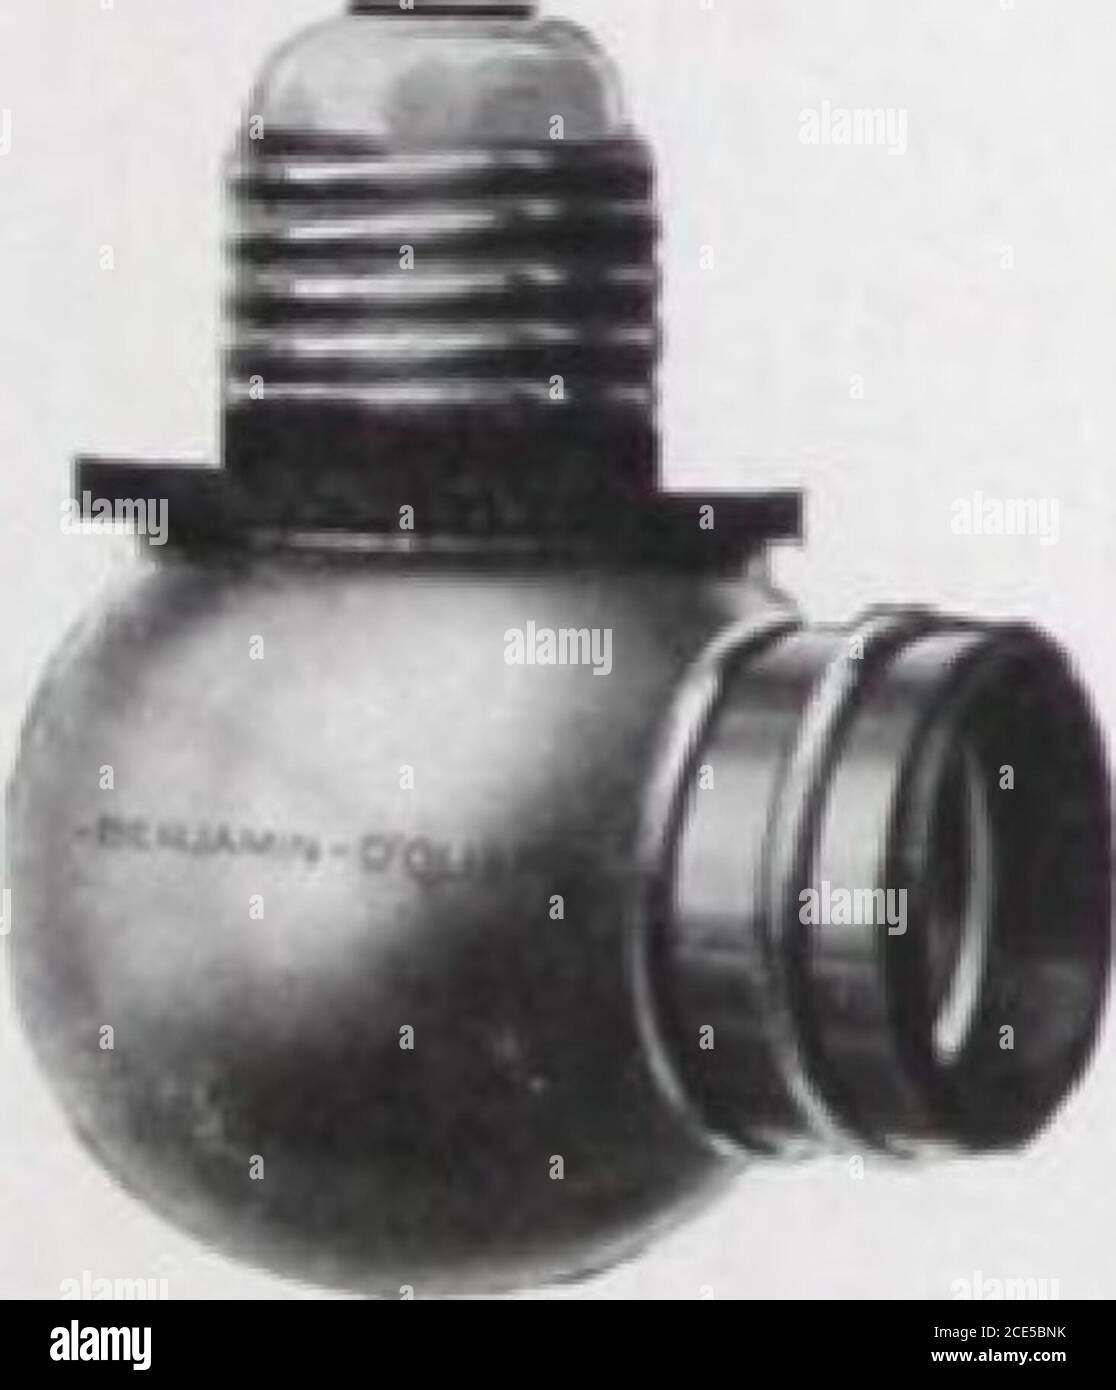 . Benjamin Electric Mfg. Co., manufacturers, wireless clusters and lighting specialties. . Cat. No. 853 r , M    Cat* No. 952 Cnt llll 2-Lightwith. Bushing $1.00 10 5 .Sg ? . u • I 1-30 10 6 854 4 1.G0 10 7 952 2-Light with Plug, Wired $195 10 fi 964 4 1&gt;8B £ 5 The Adjustable Socket Clusters 862-954 are designed for use mth ceiling orpendent dome fixtures, .stand lamps in dining rooms, reading rooms, etc., where it isdesirable to adjust and U the lights in special relation to the sides • 1 th dome orreflector. 1 he rocket may f»e turned to any position between two points l^u dapart, and lo Stock Photo